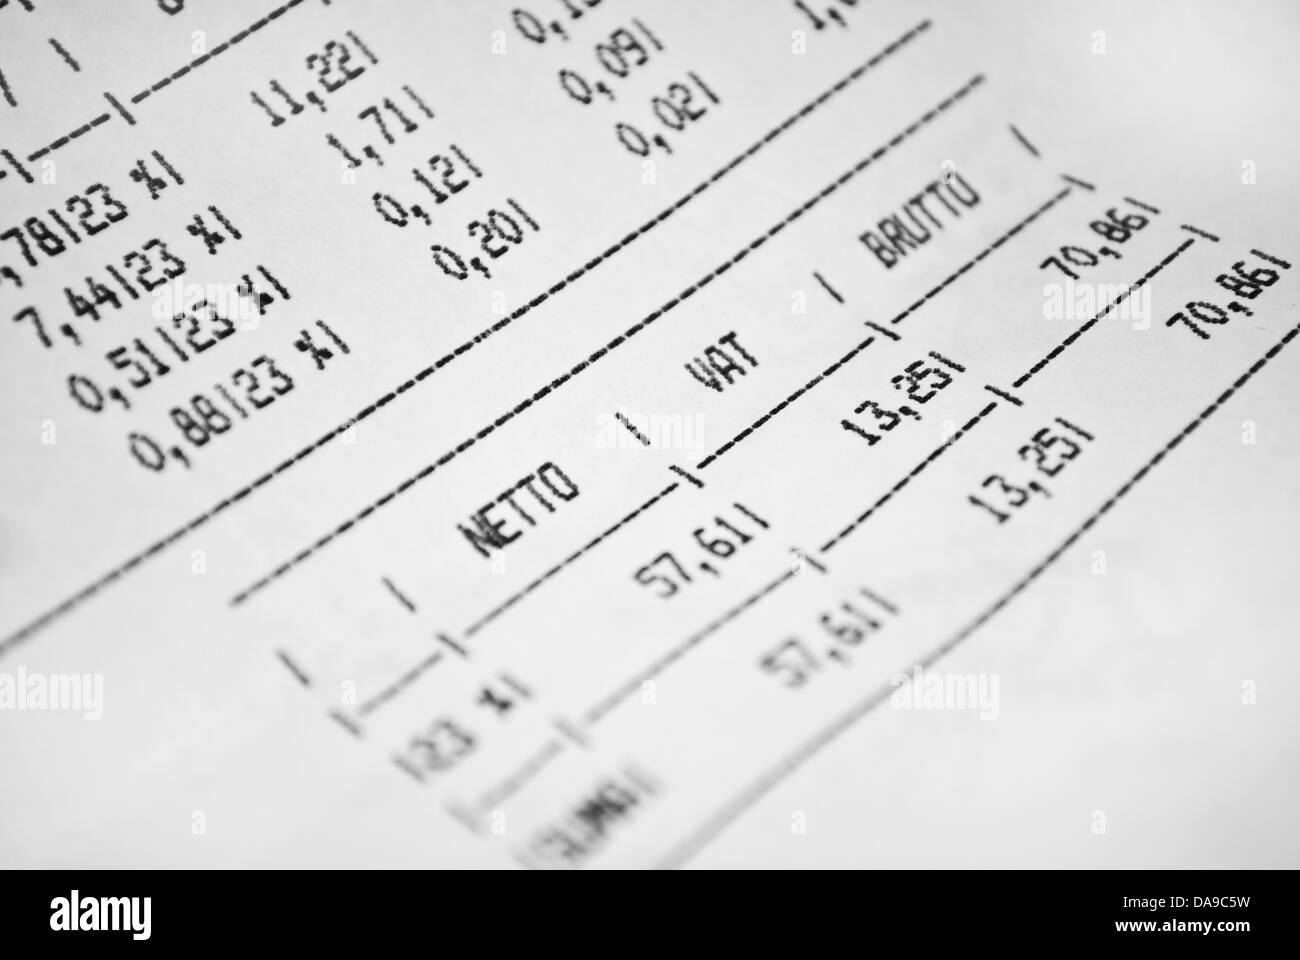 Invoice sheet with gross and net prices and vat tax value Stock Photo